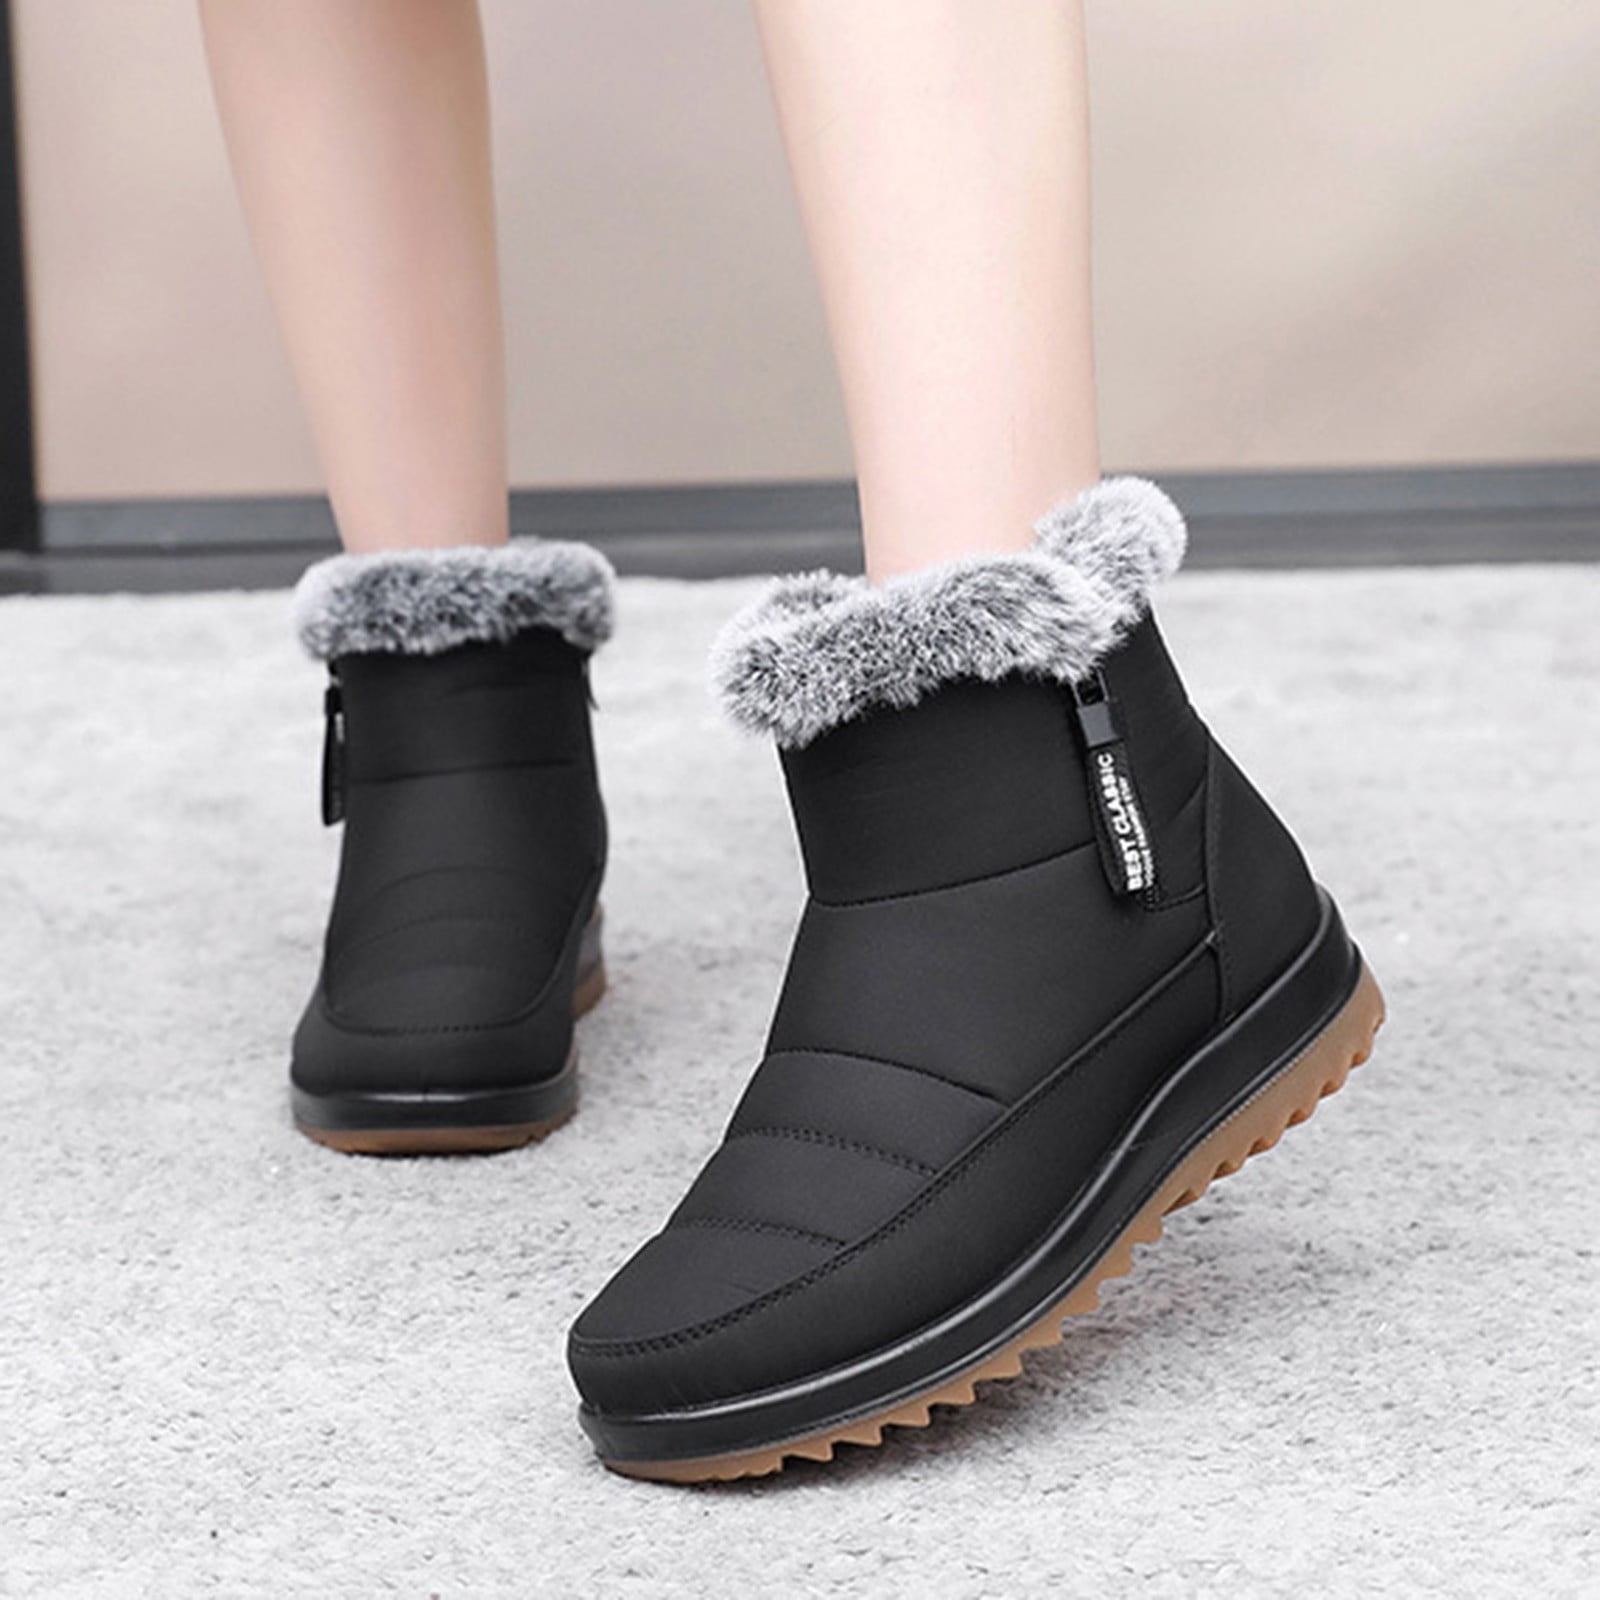 Yinguo Winter Comfortable Cotton Shoes Anti Slip Boots For Women Snow ...